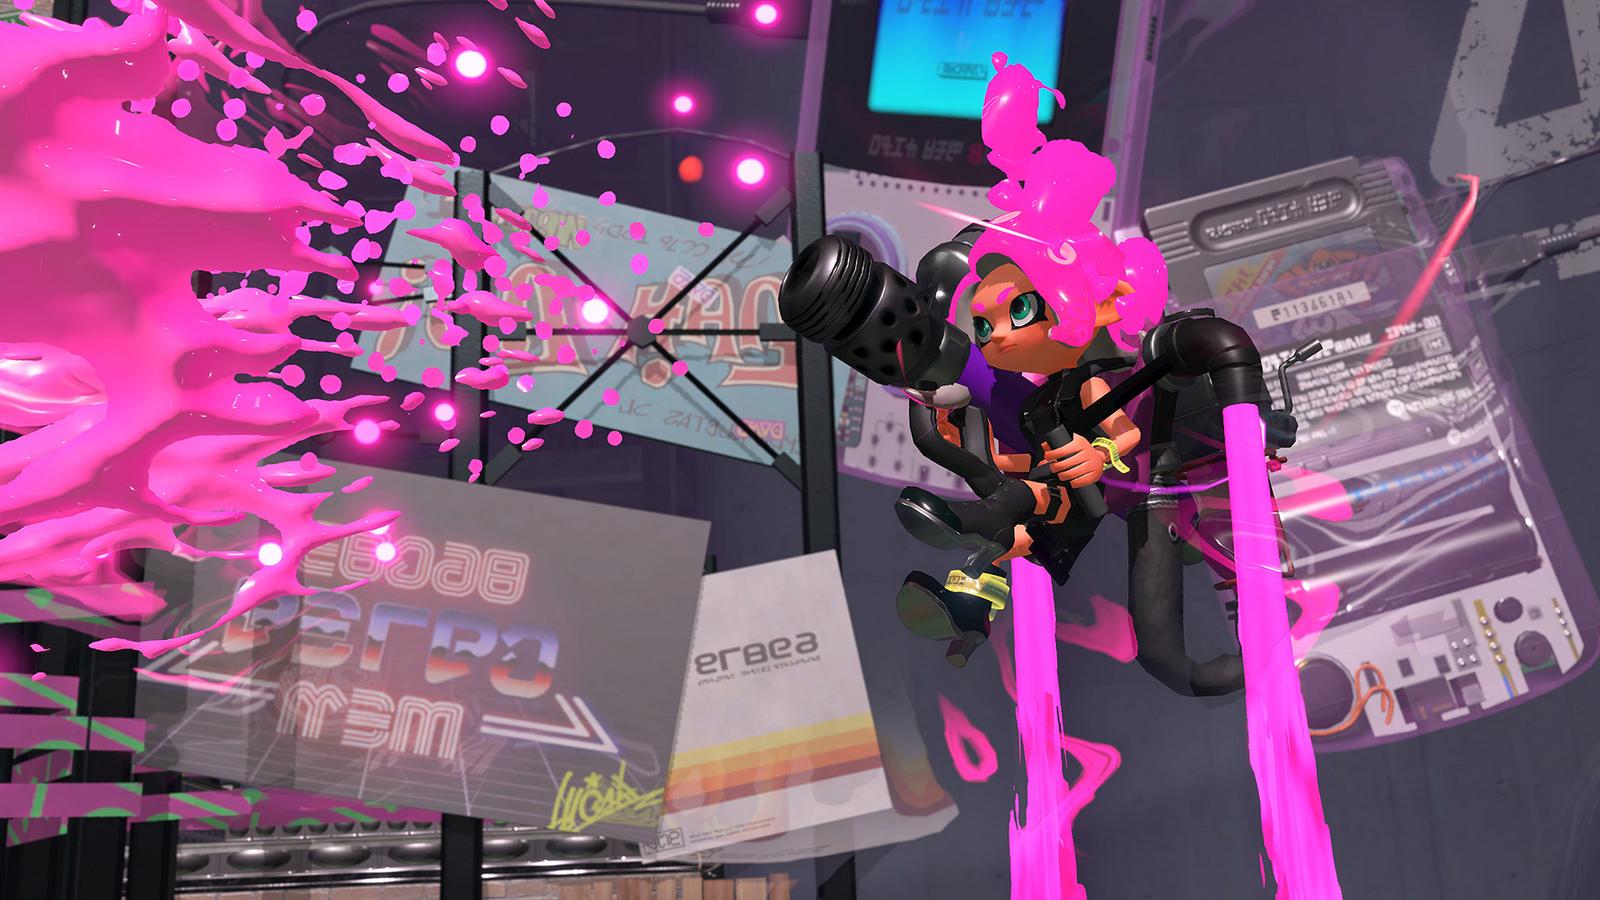 Splatoon 2: Octo Expansion sneaks in GameCube, Game Boy Color